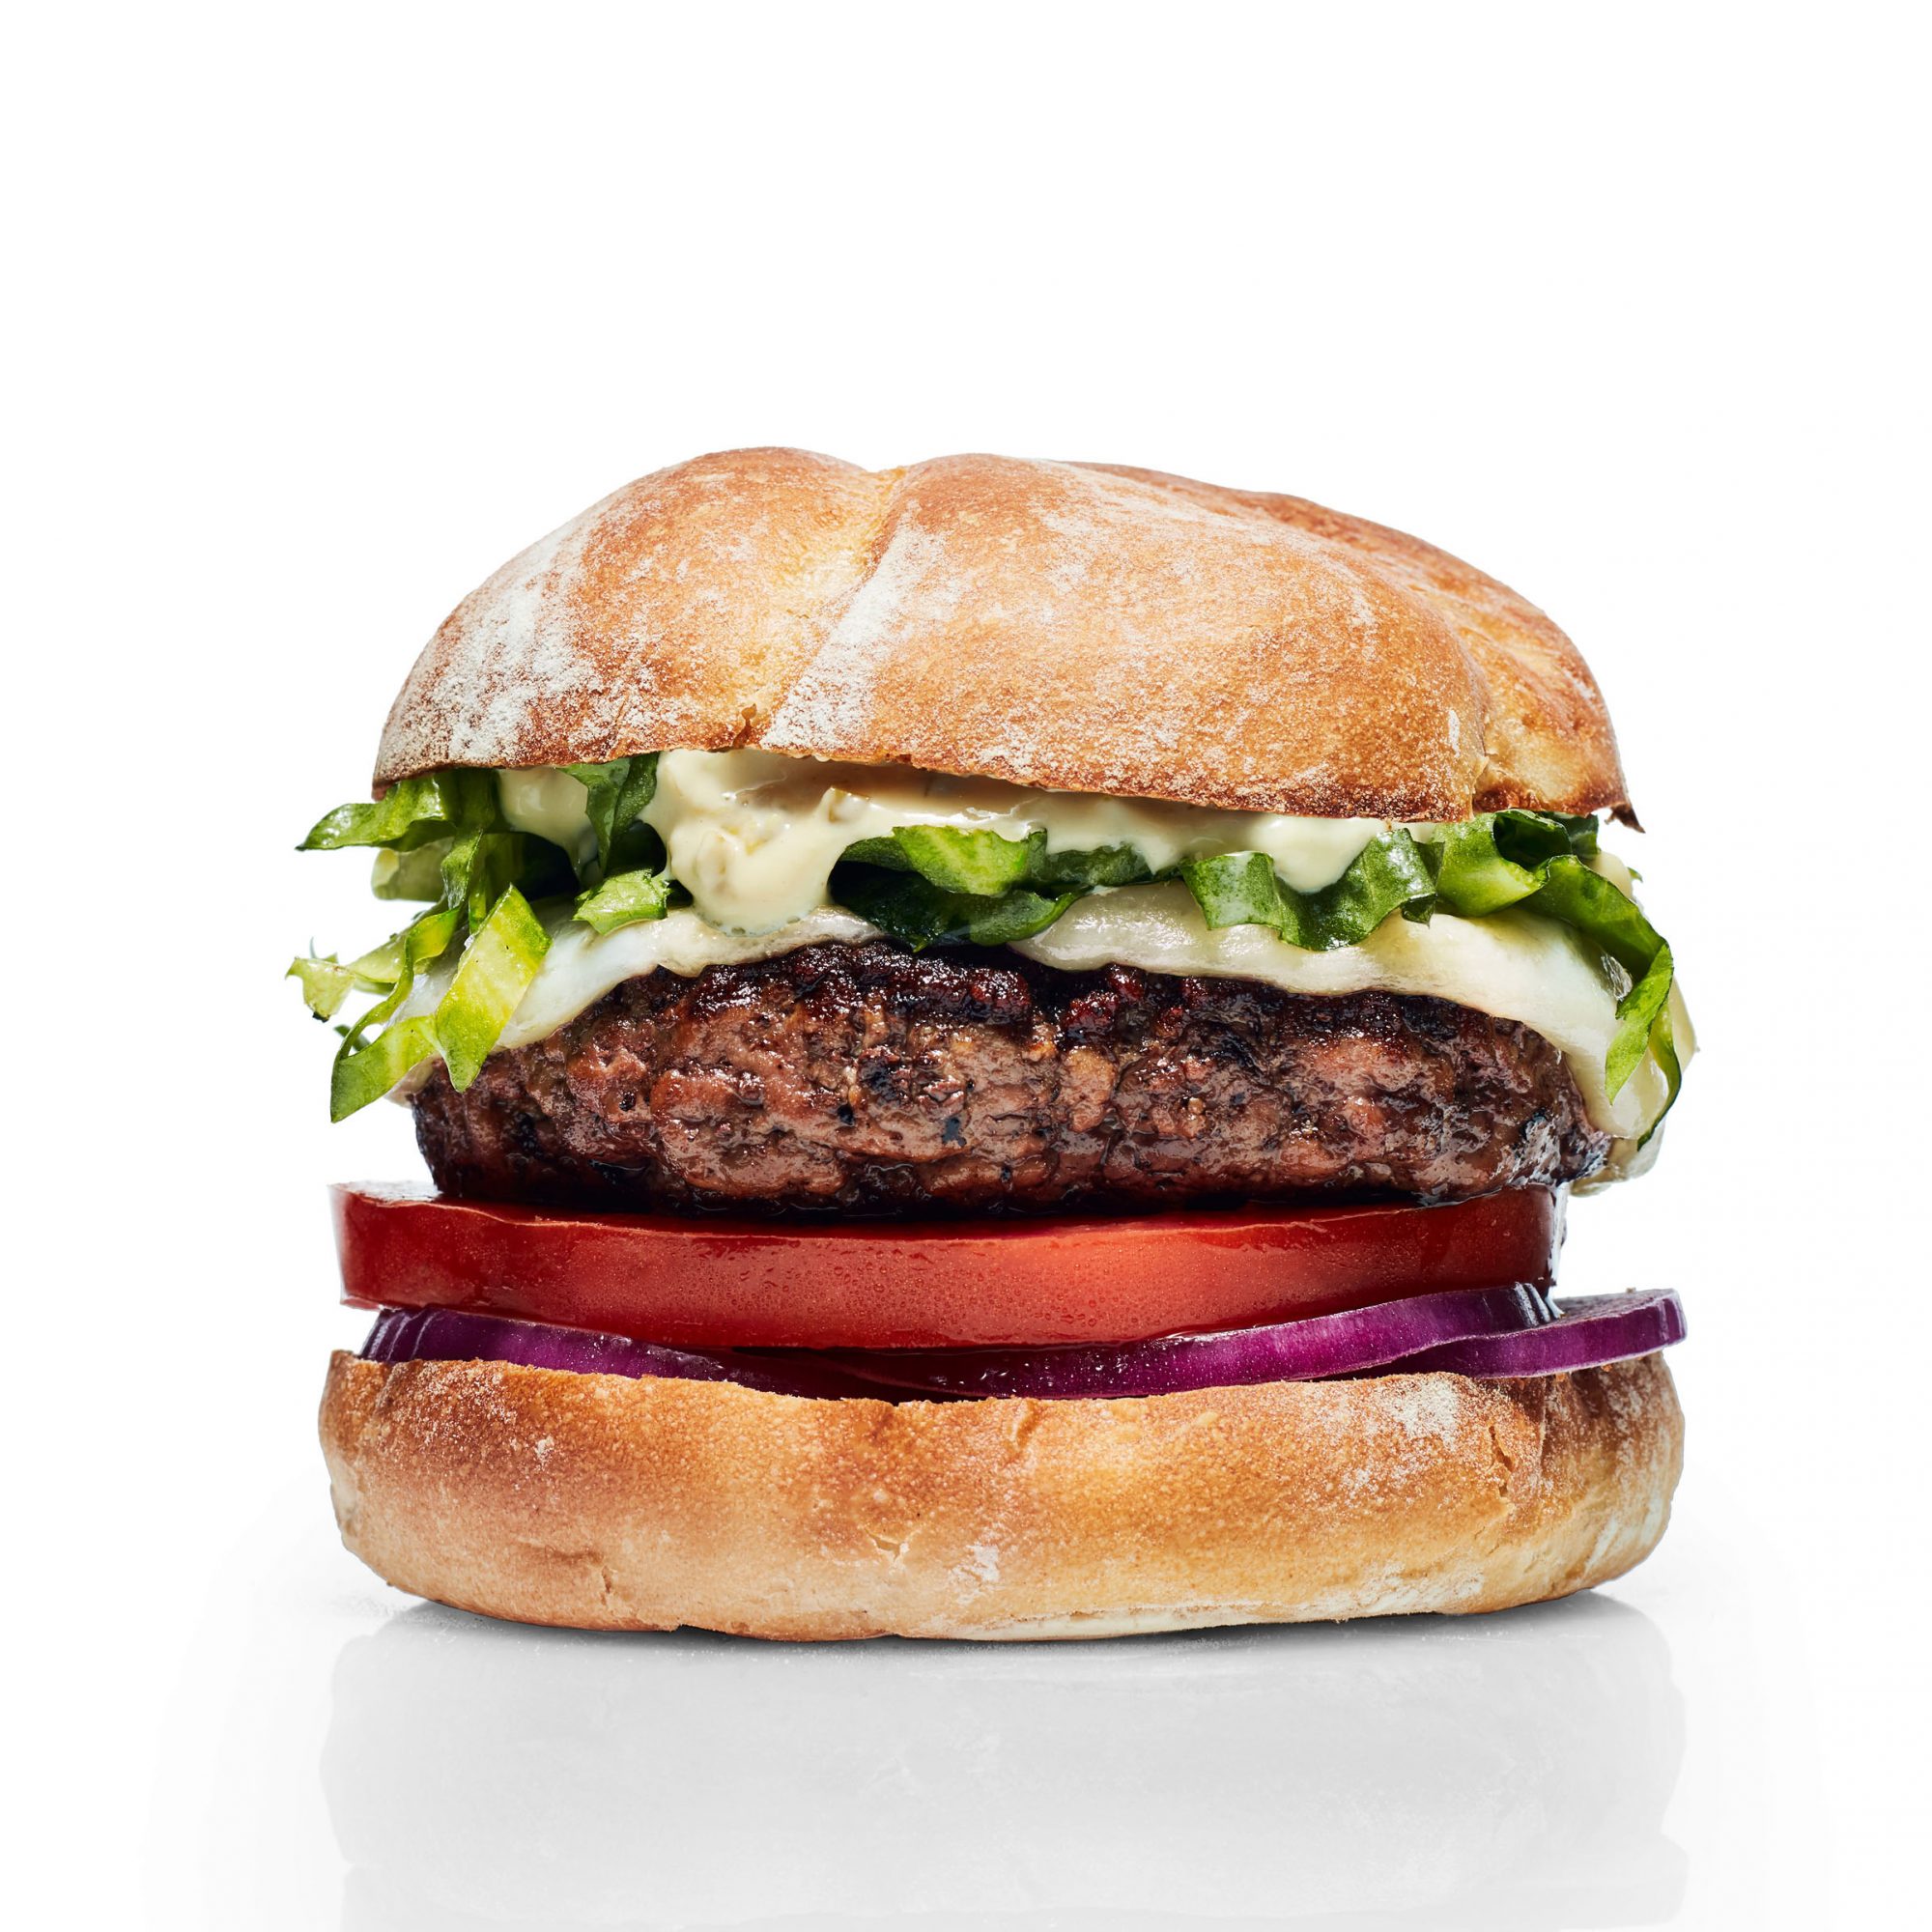 Burger of the Month: Tuscan-Style Steak Burgers with Garlicky Aioli